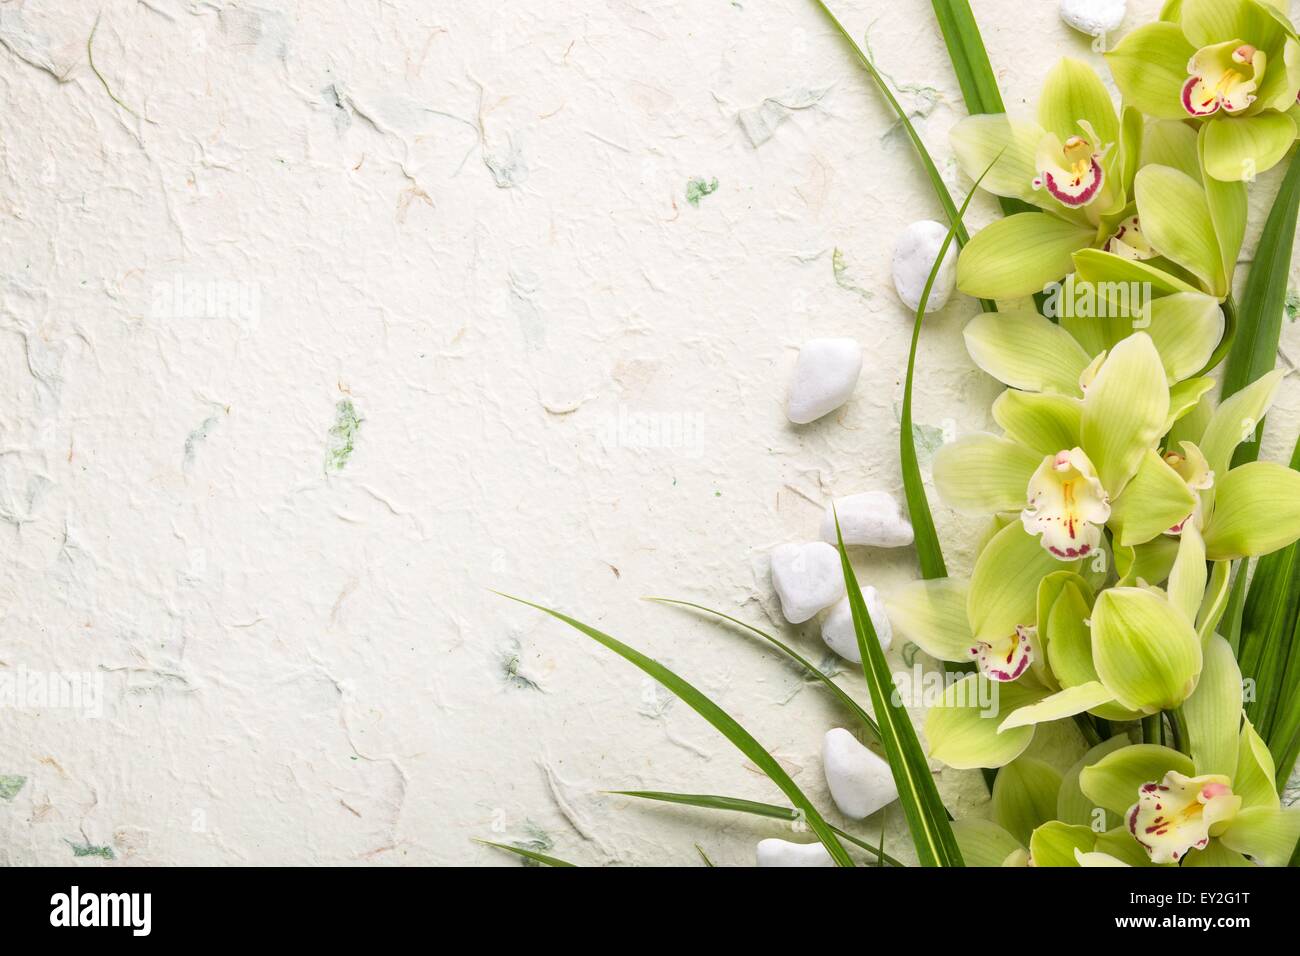 Spa still life with blooming orchid and pebbles. Stock Photo